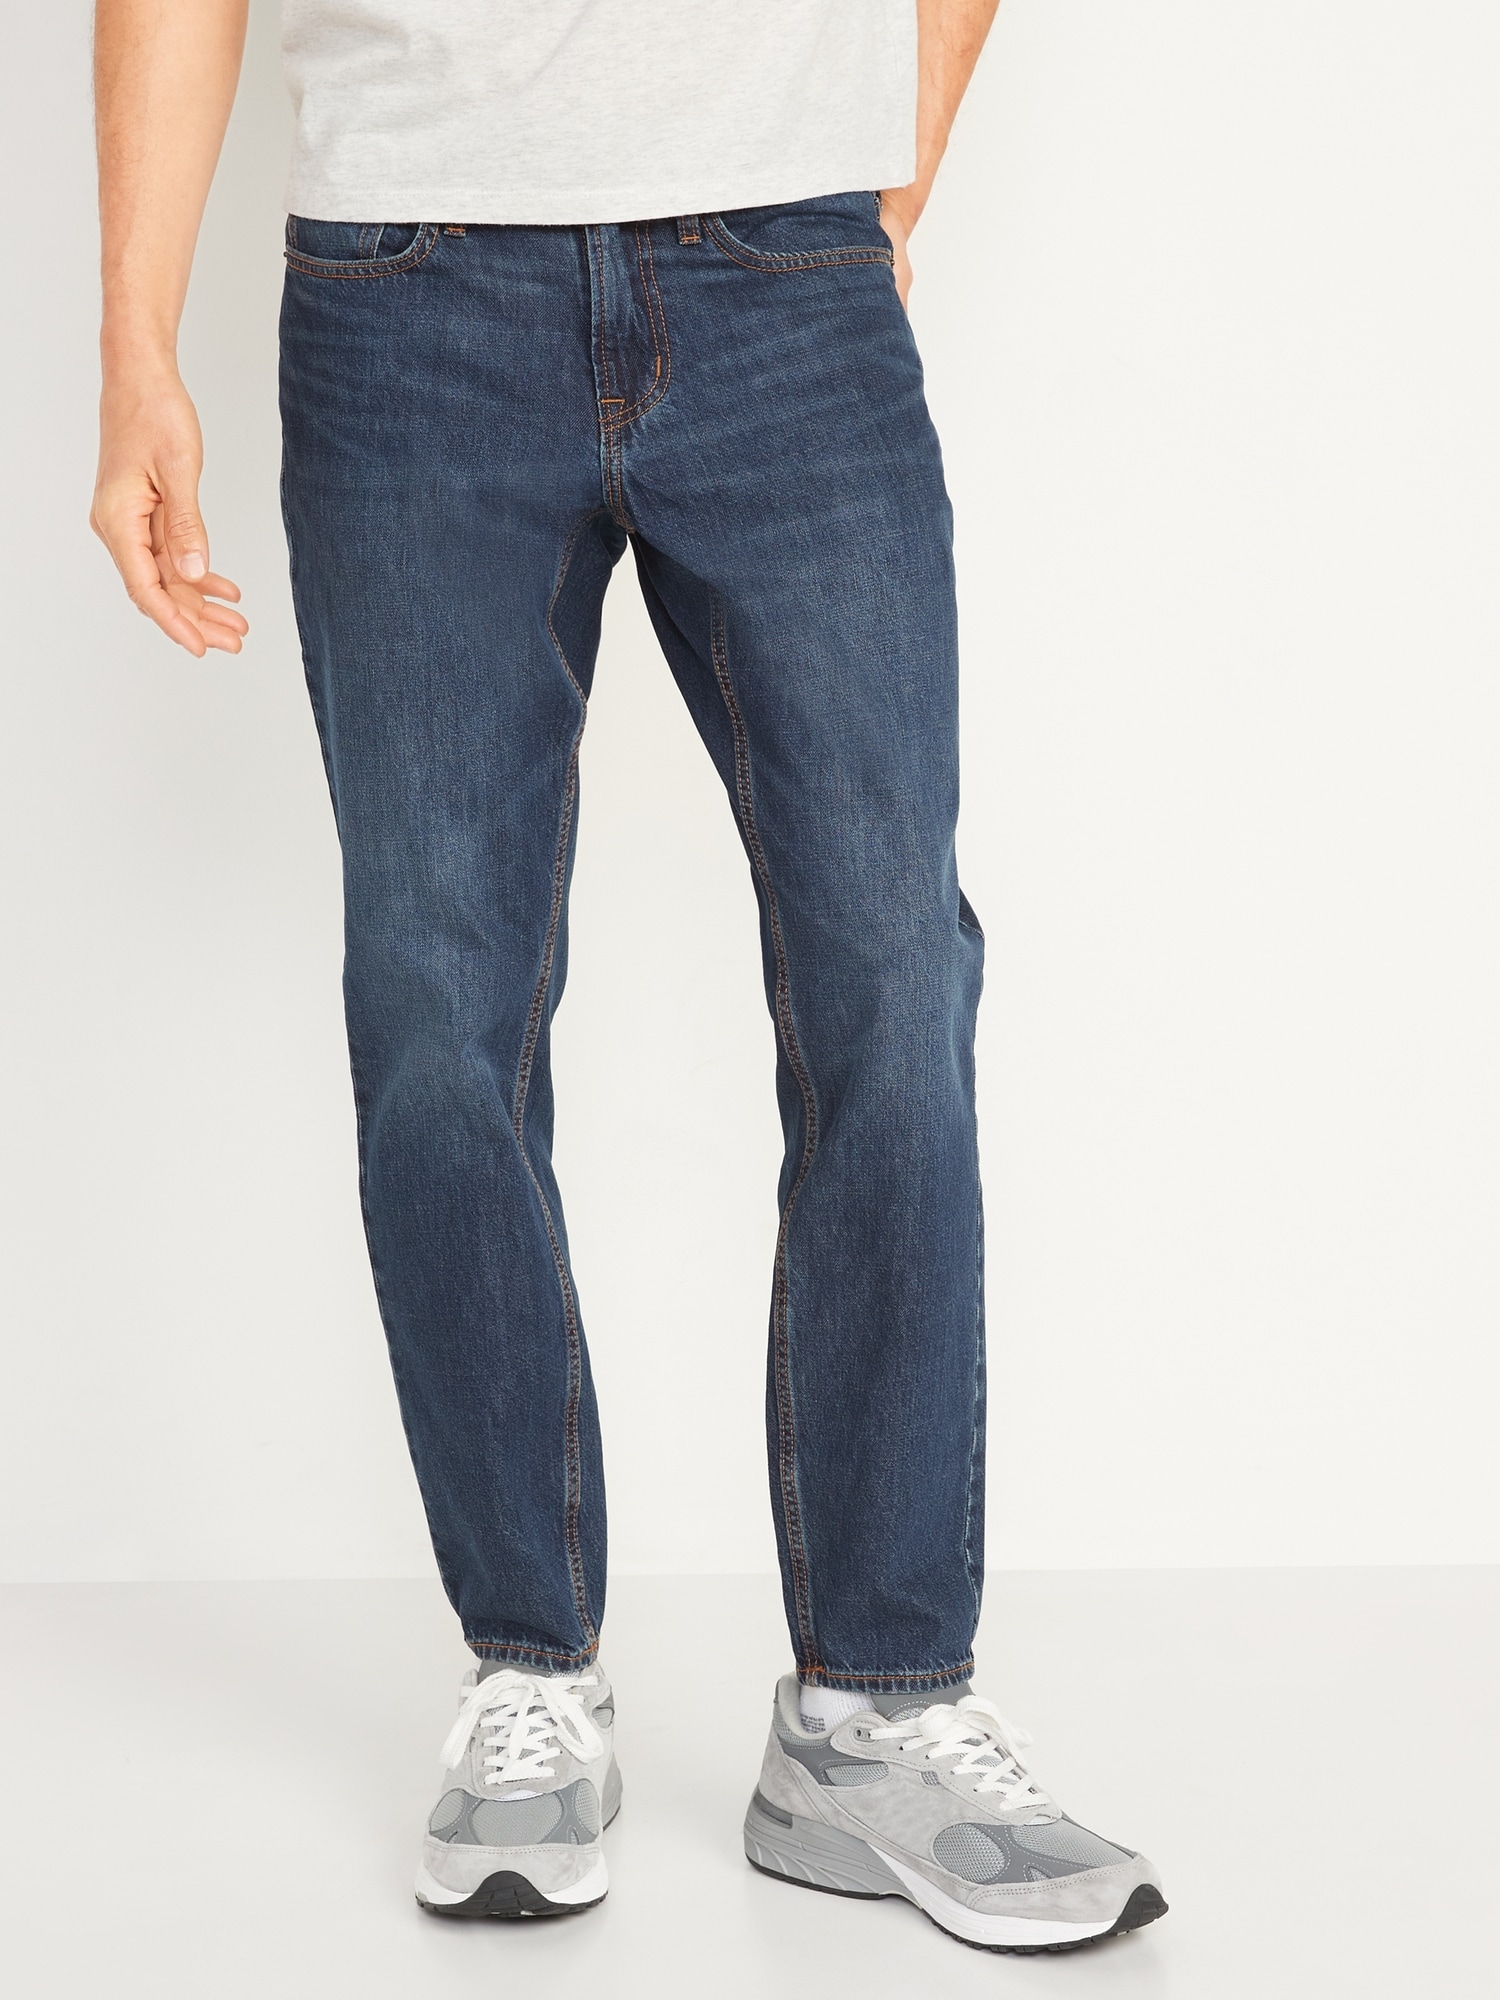 Athletic Taper Non-Stretch Jeans 2-Pack for Men | Old Navy